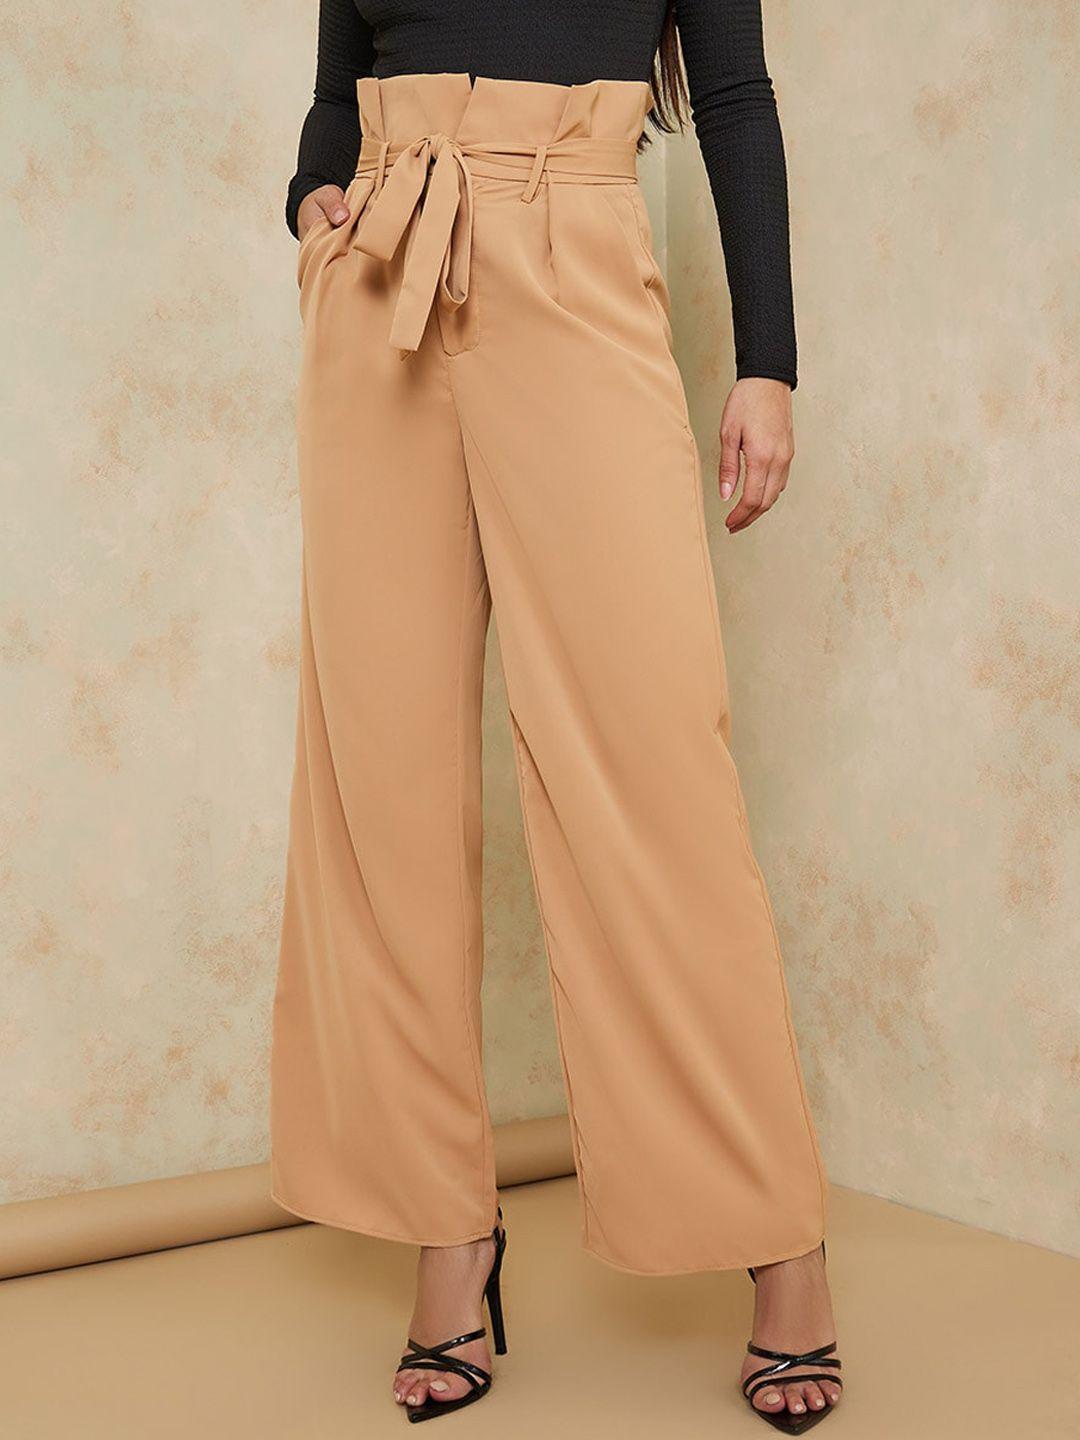 styli-women-high-rise-parallel-trousers